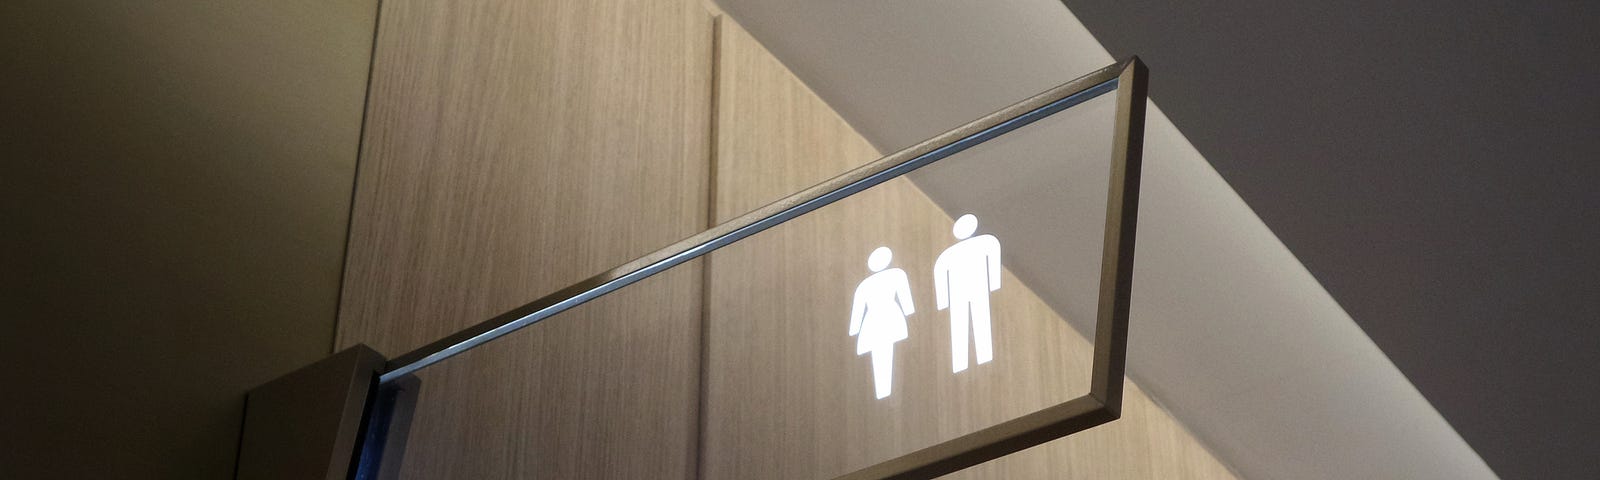 A sign for public toilets displaying a female silhouette and a male silhoette. Both silhouettes are lit up.